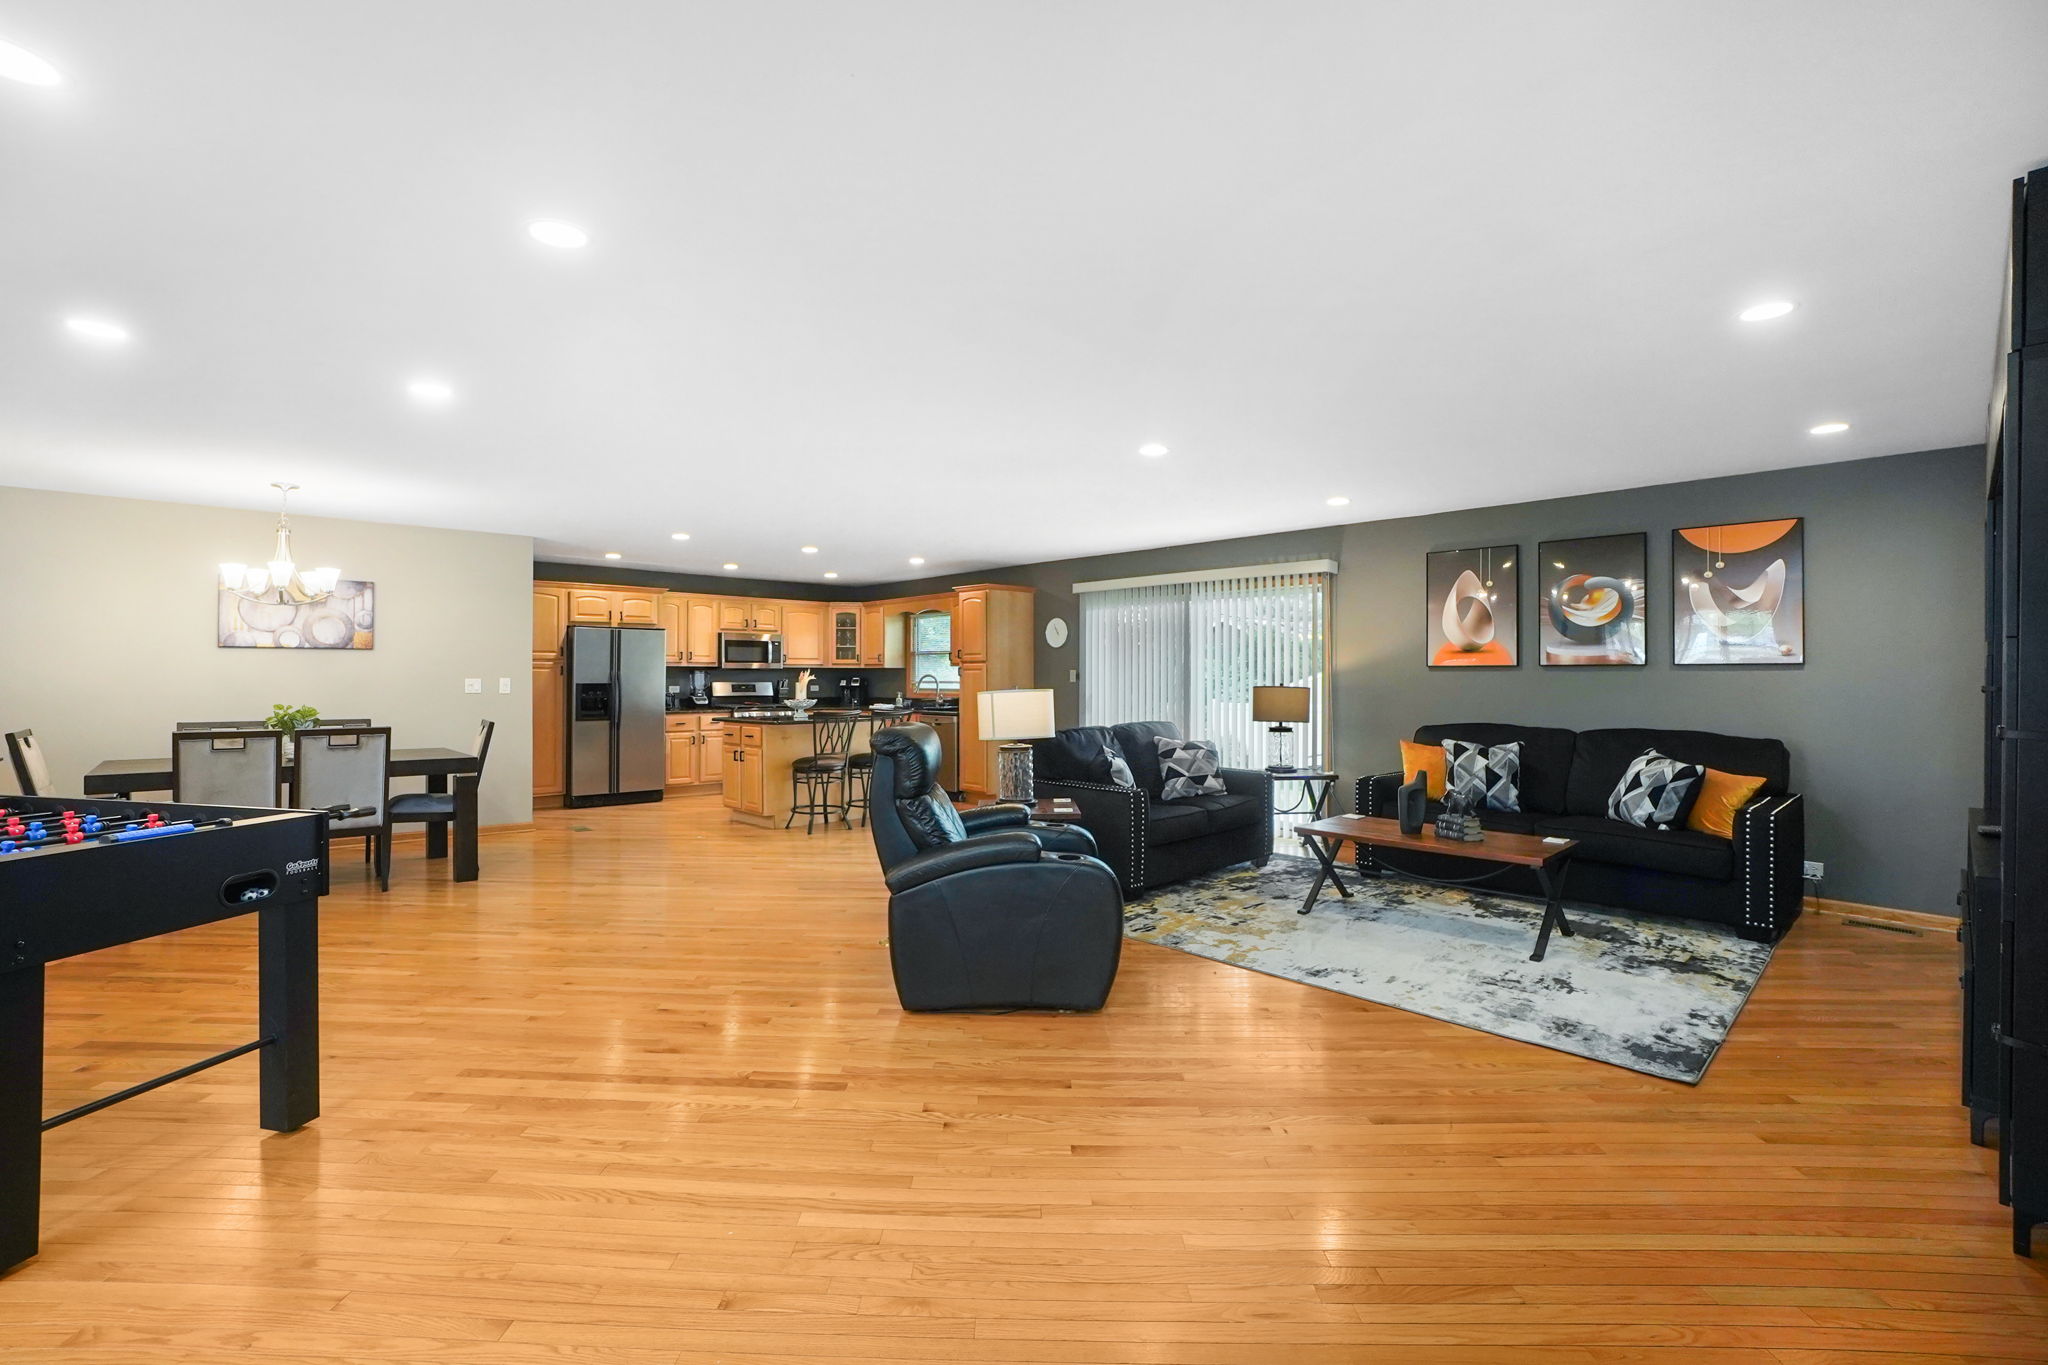 Living and kitchen areas of a house rental. Find furnished homes in Chicago.